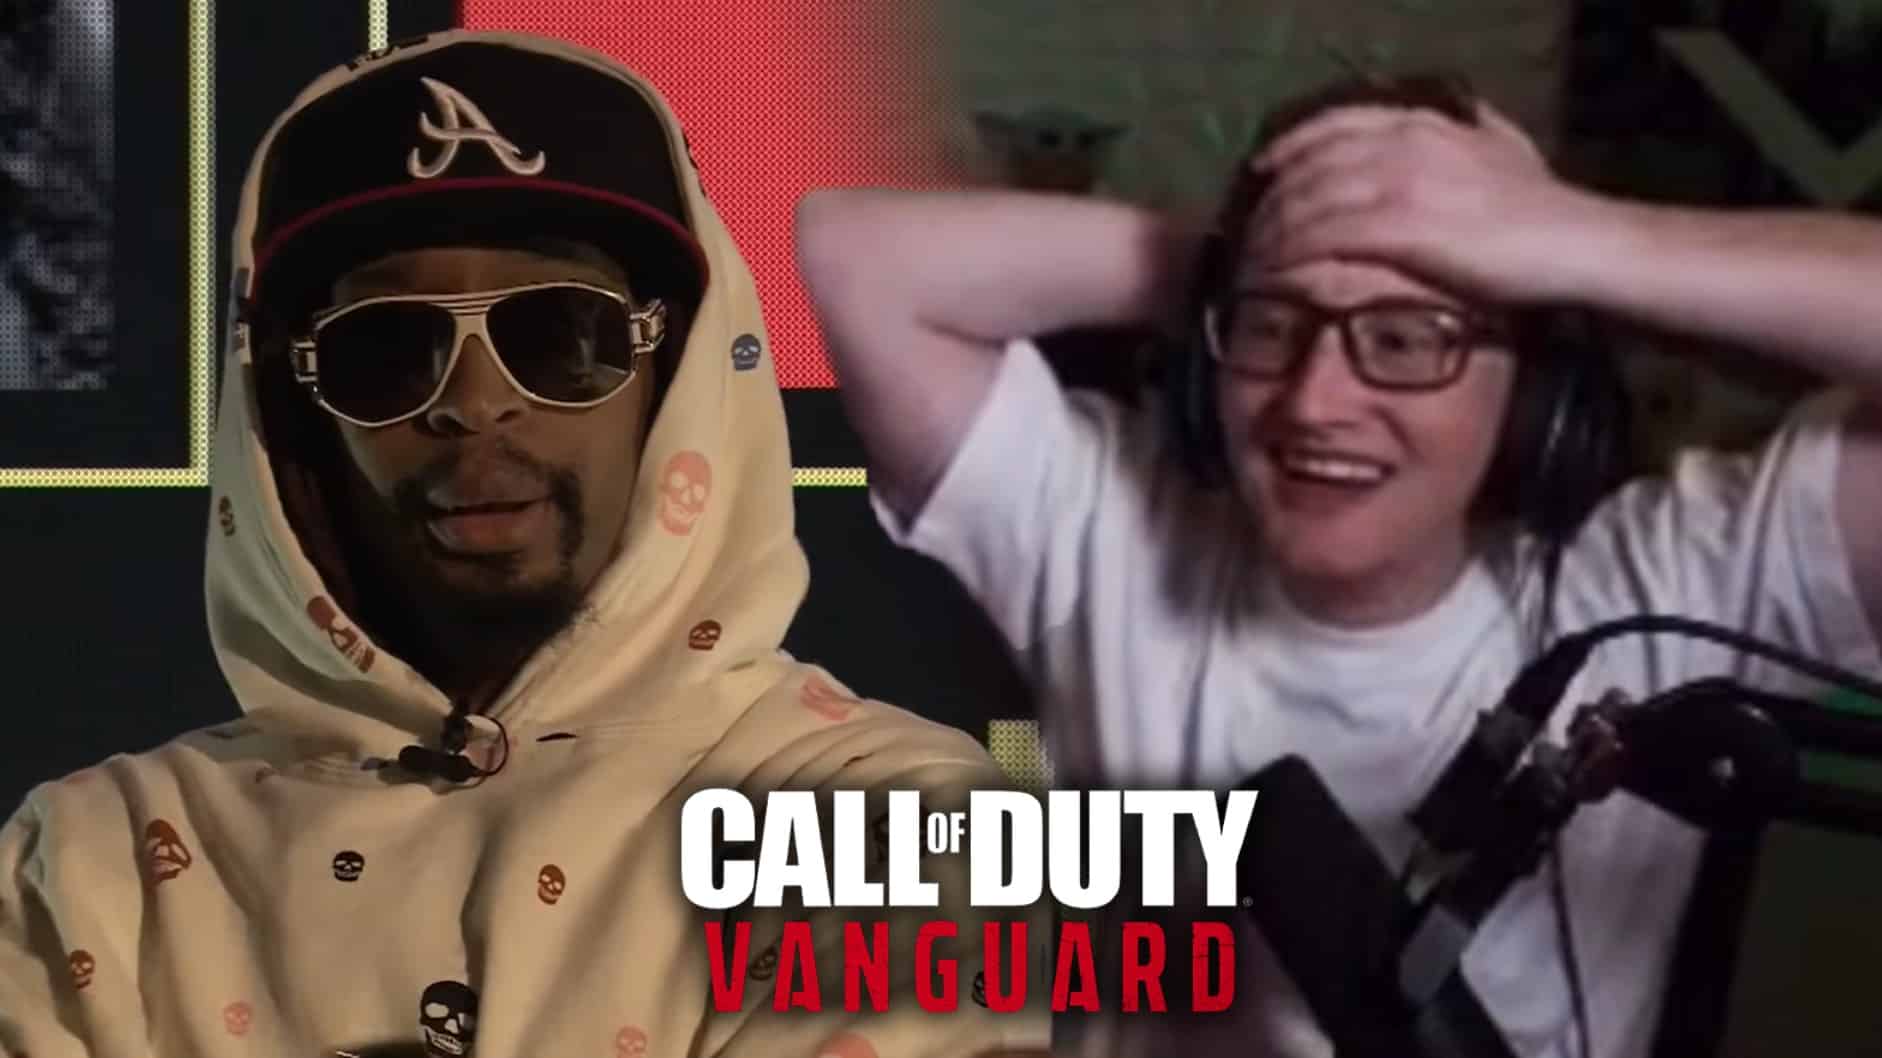 A picture of Lil Jon on stage at the Vanguard reveal event next to a picture of Scump on stream